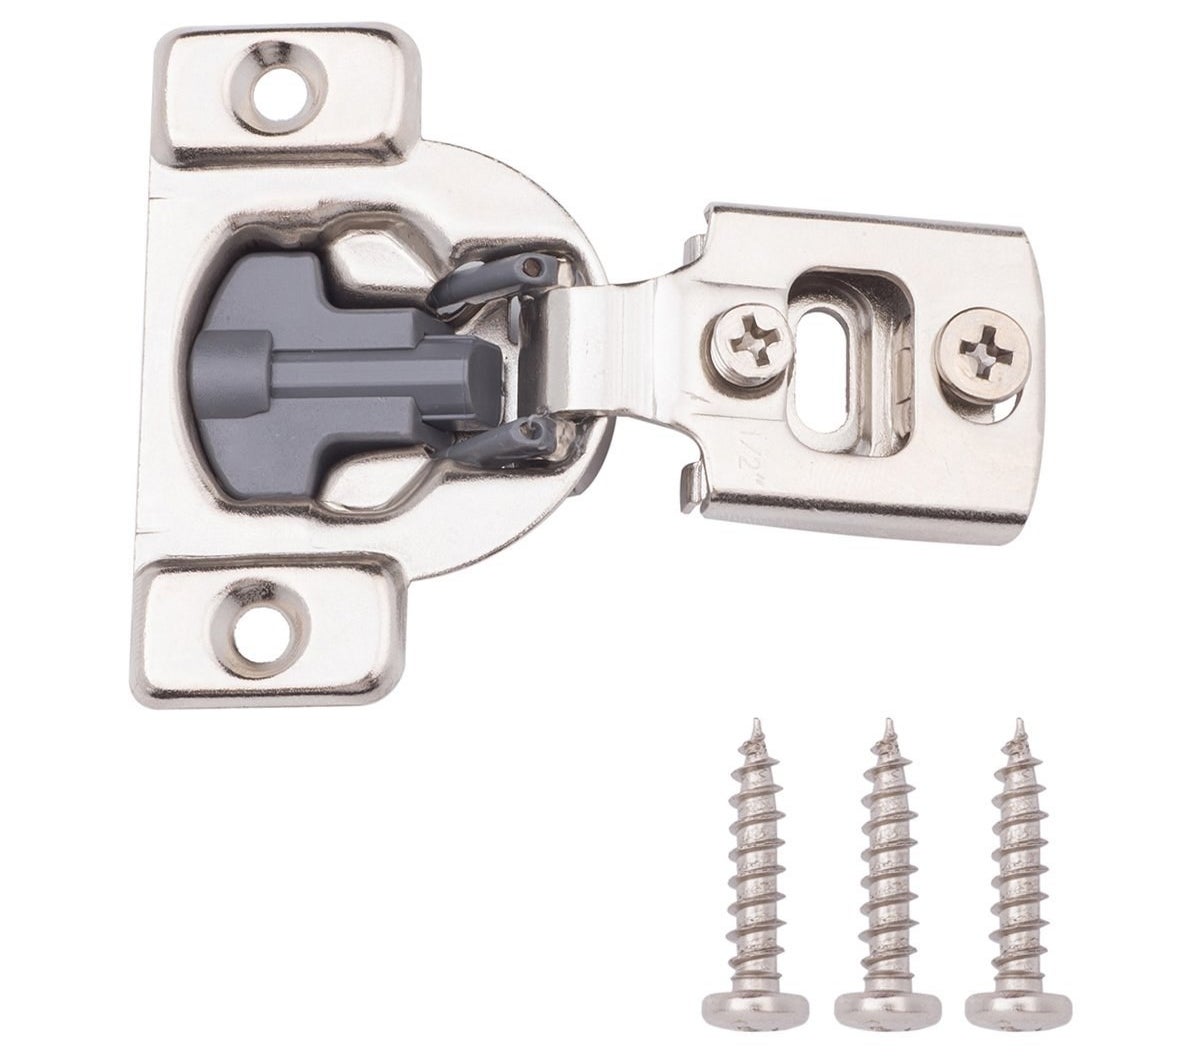 The nickel plated steel soft close hinge